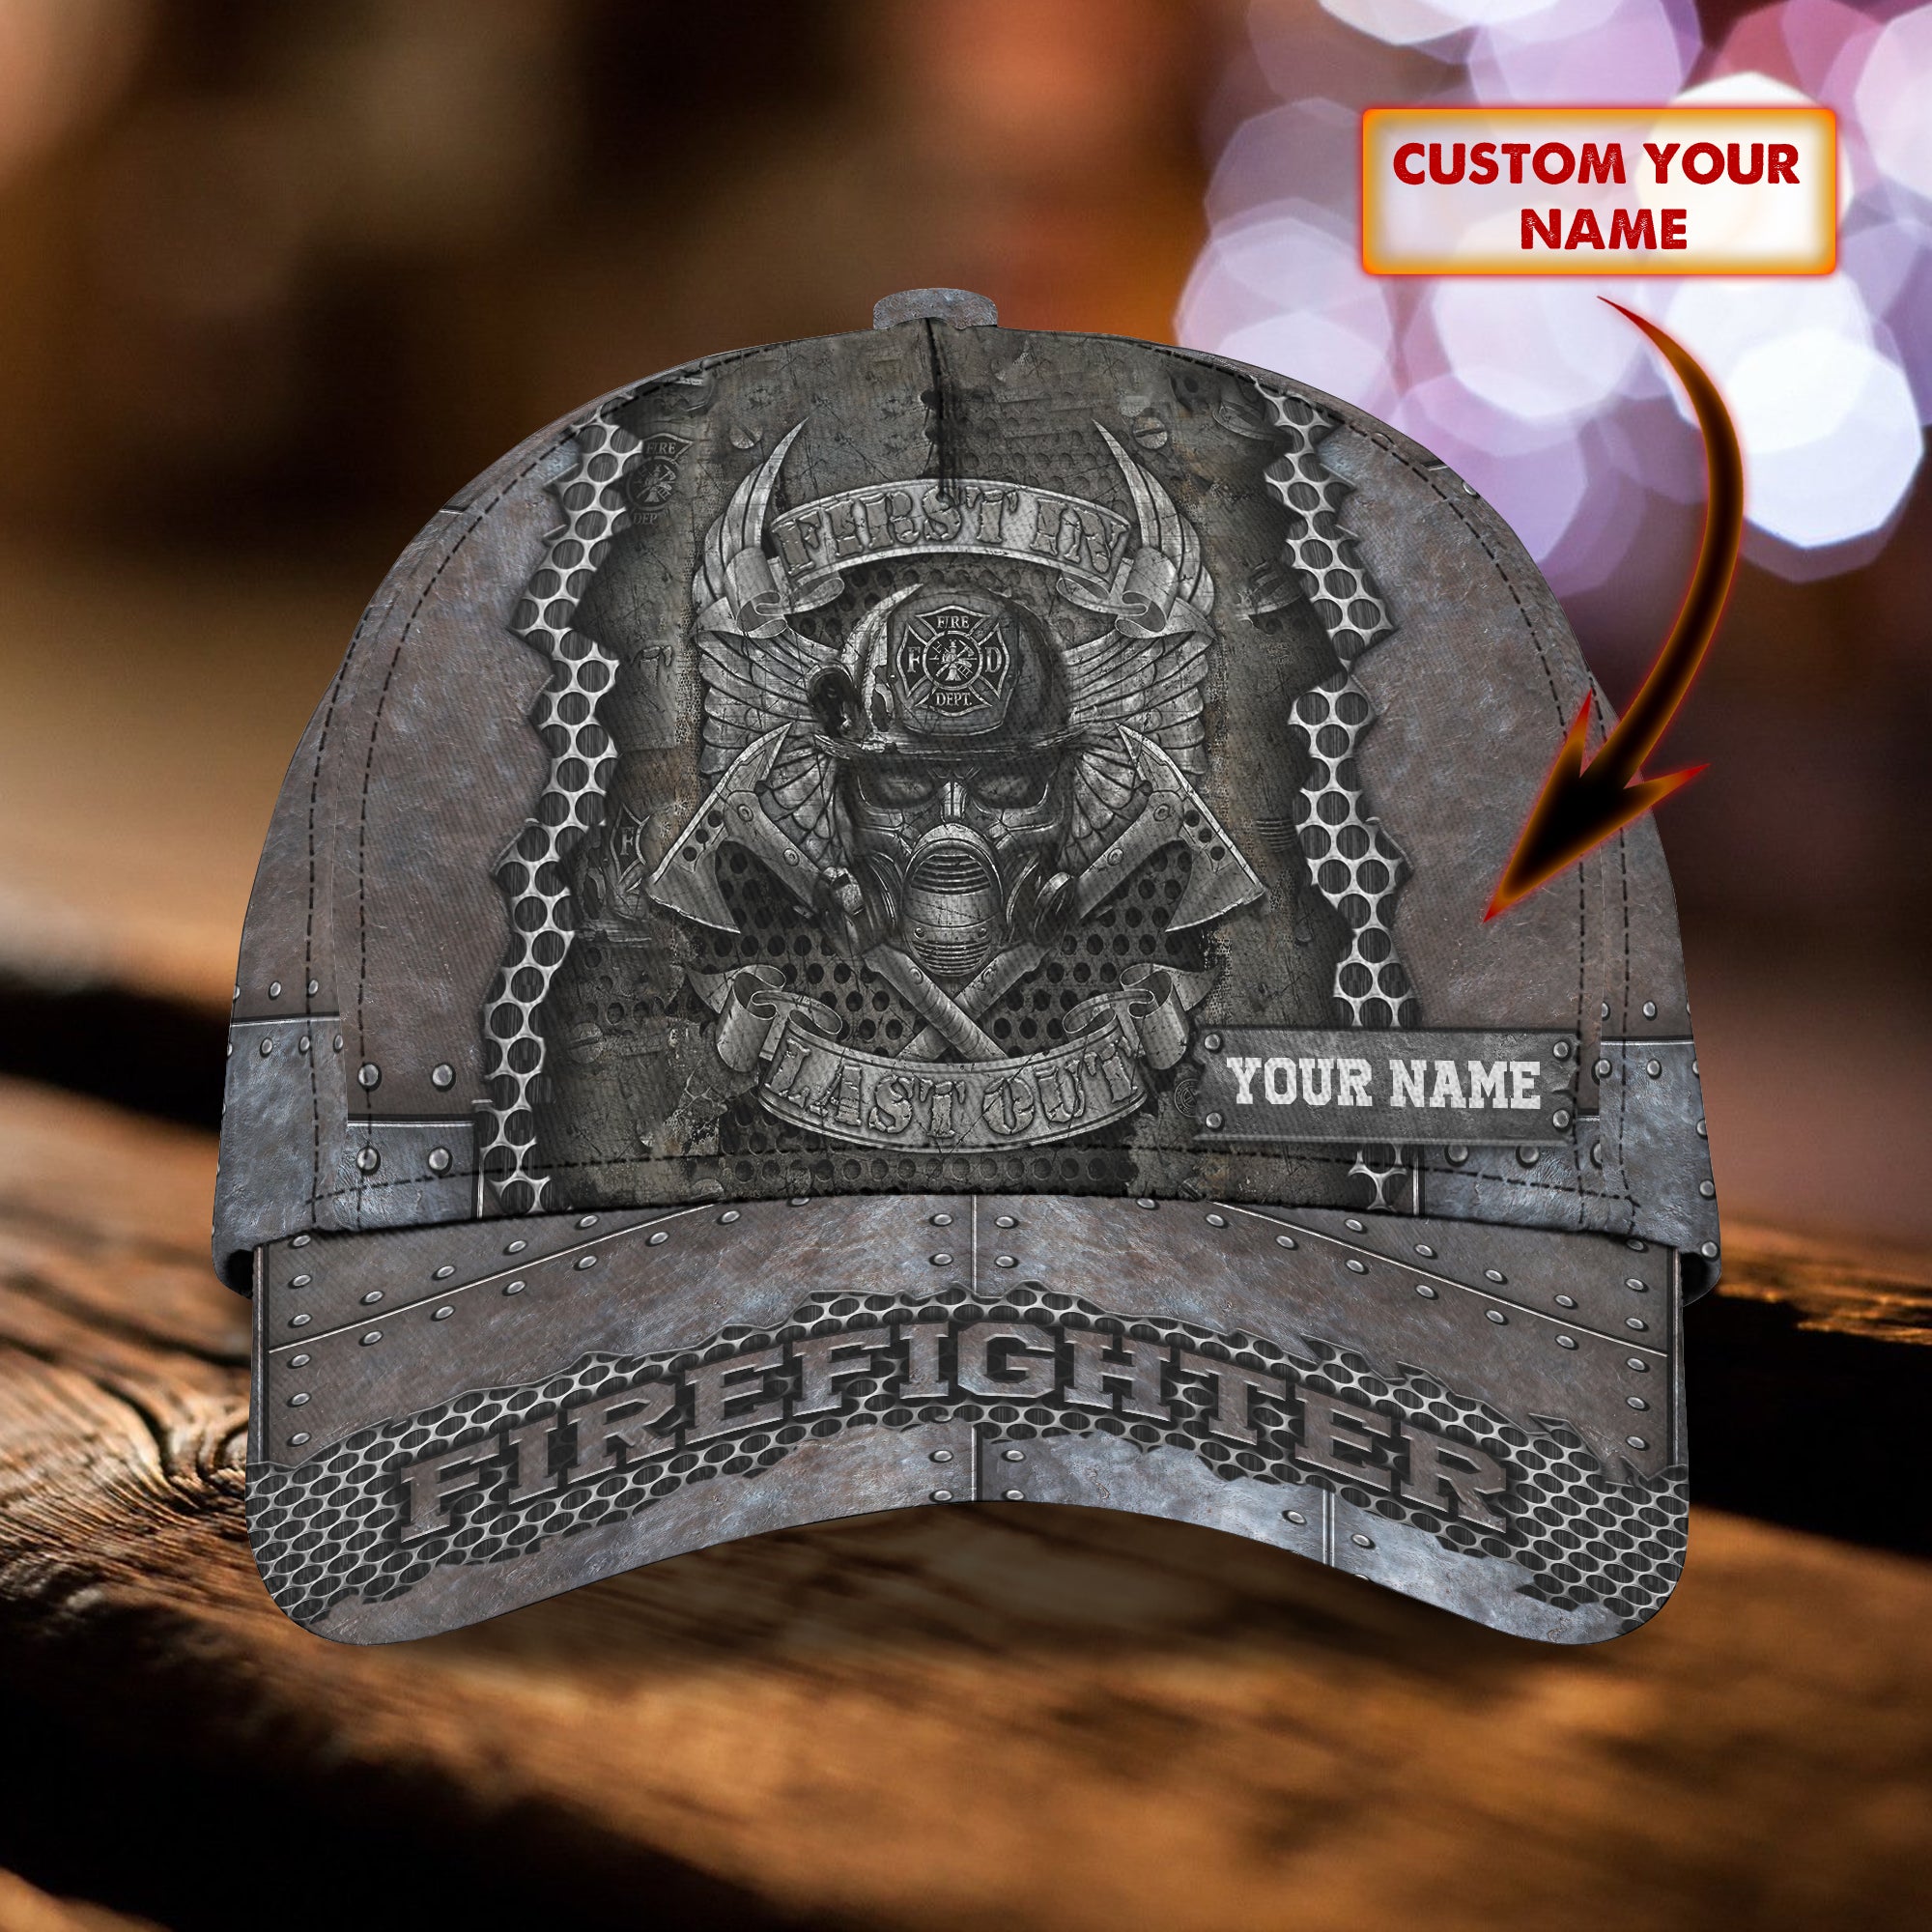 Firefighter - Personalized Name Cap 10 - Nvc97